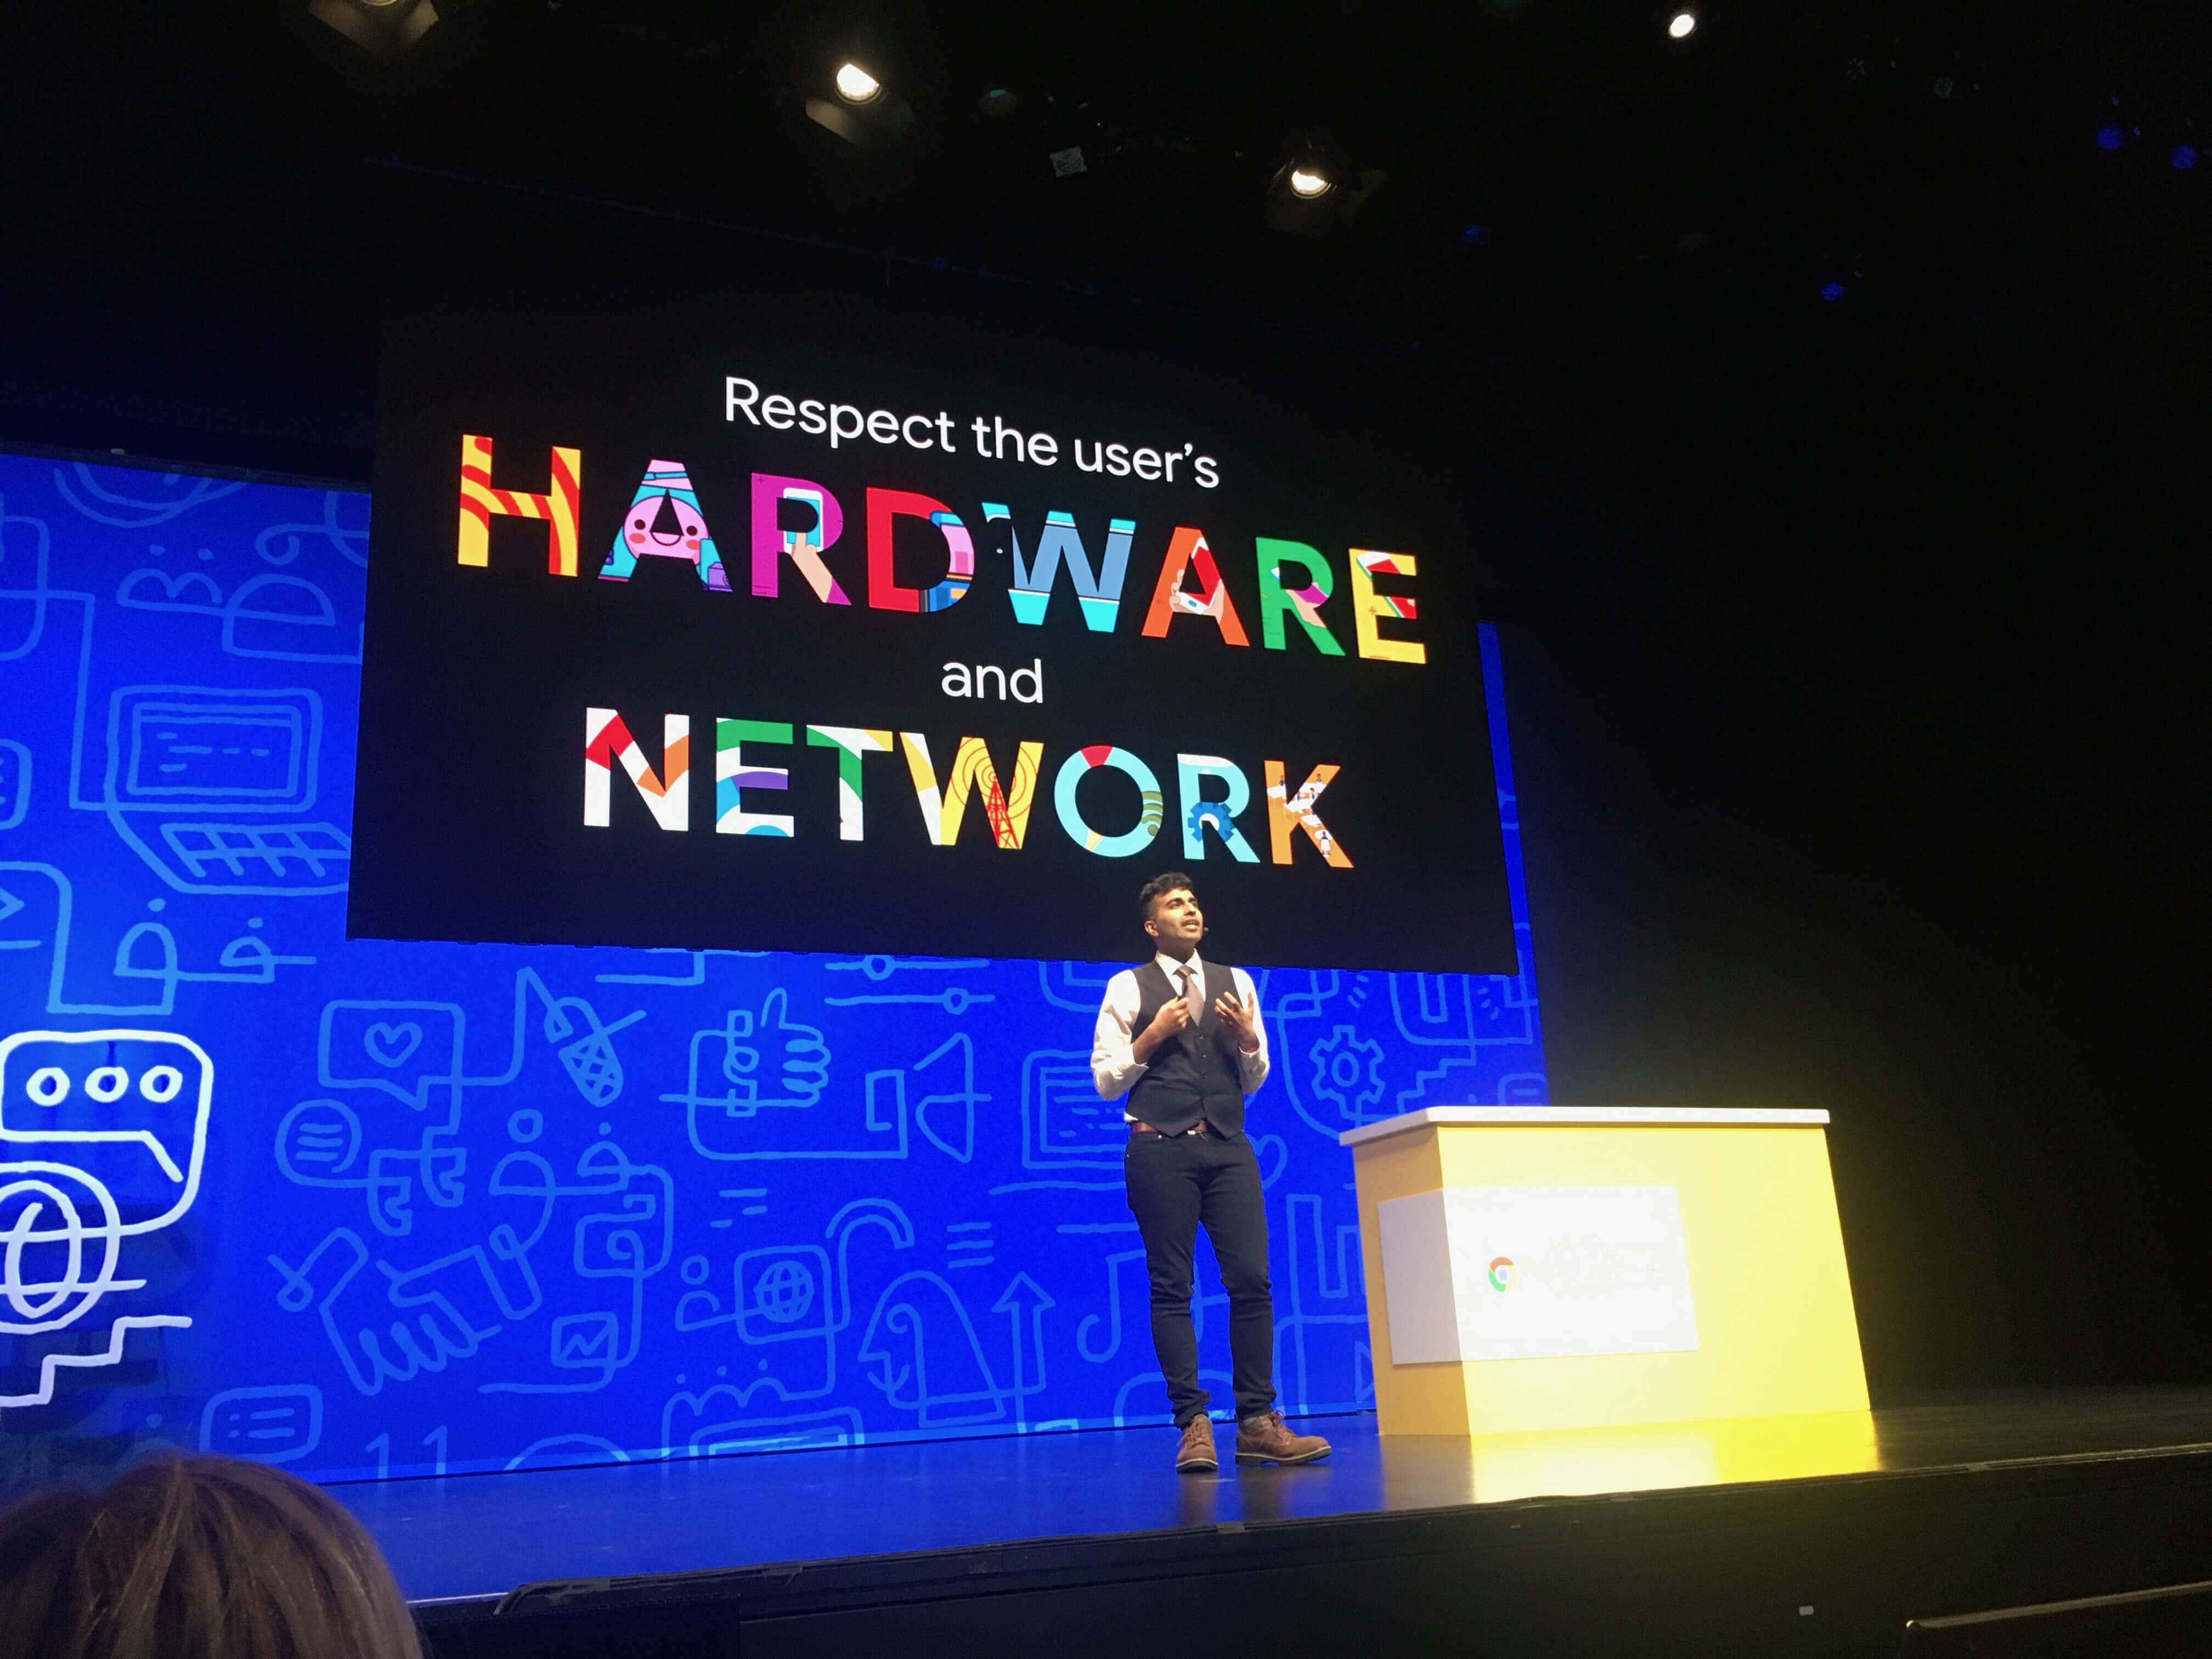 Addy Osmani: Respect the user's network and hardware